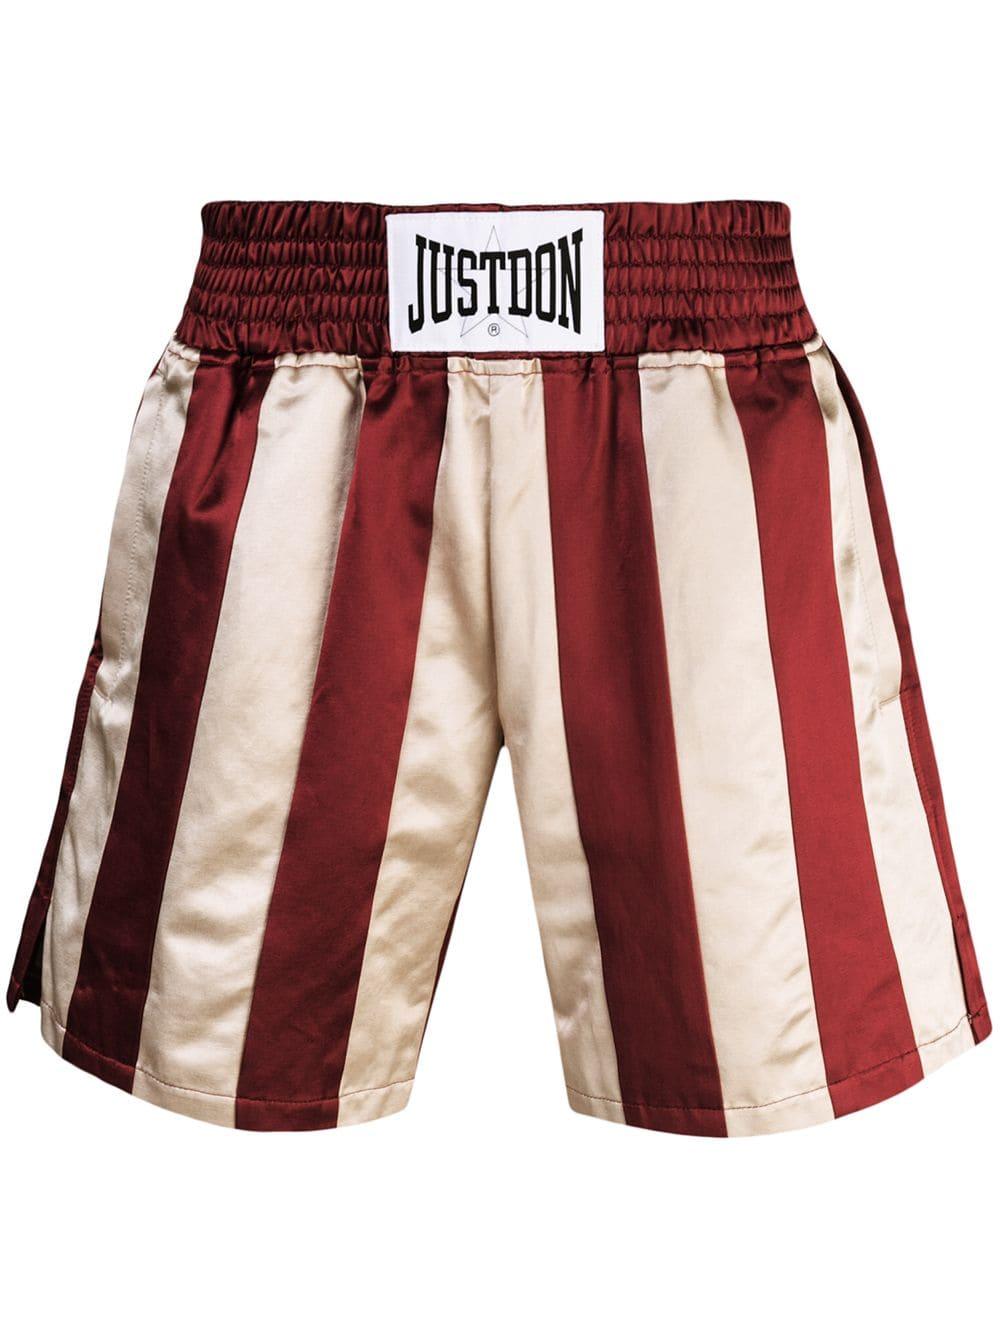 Just Don Cotton Striped Boxing Shorts in Burgundy (Red) for Men - Lyst